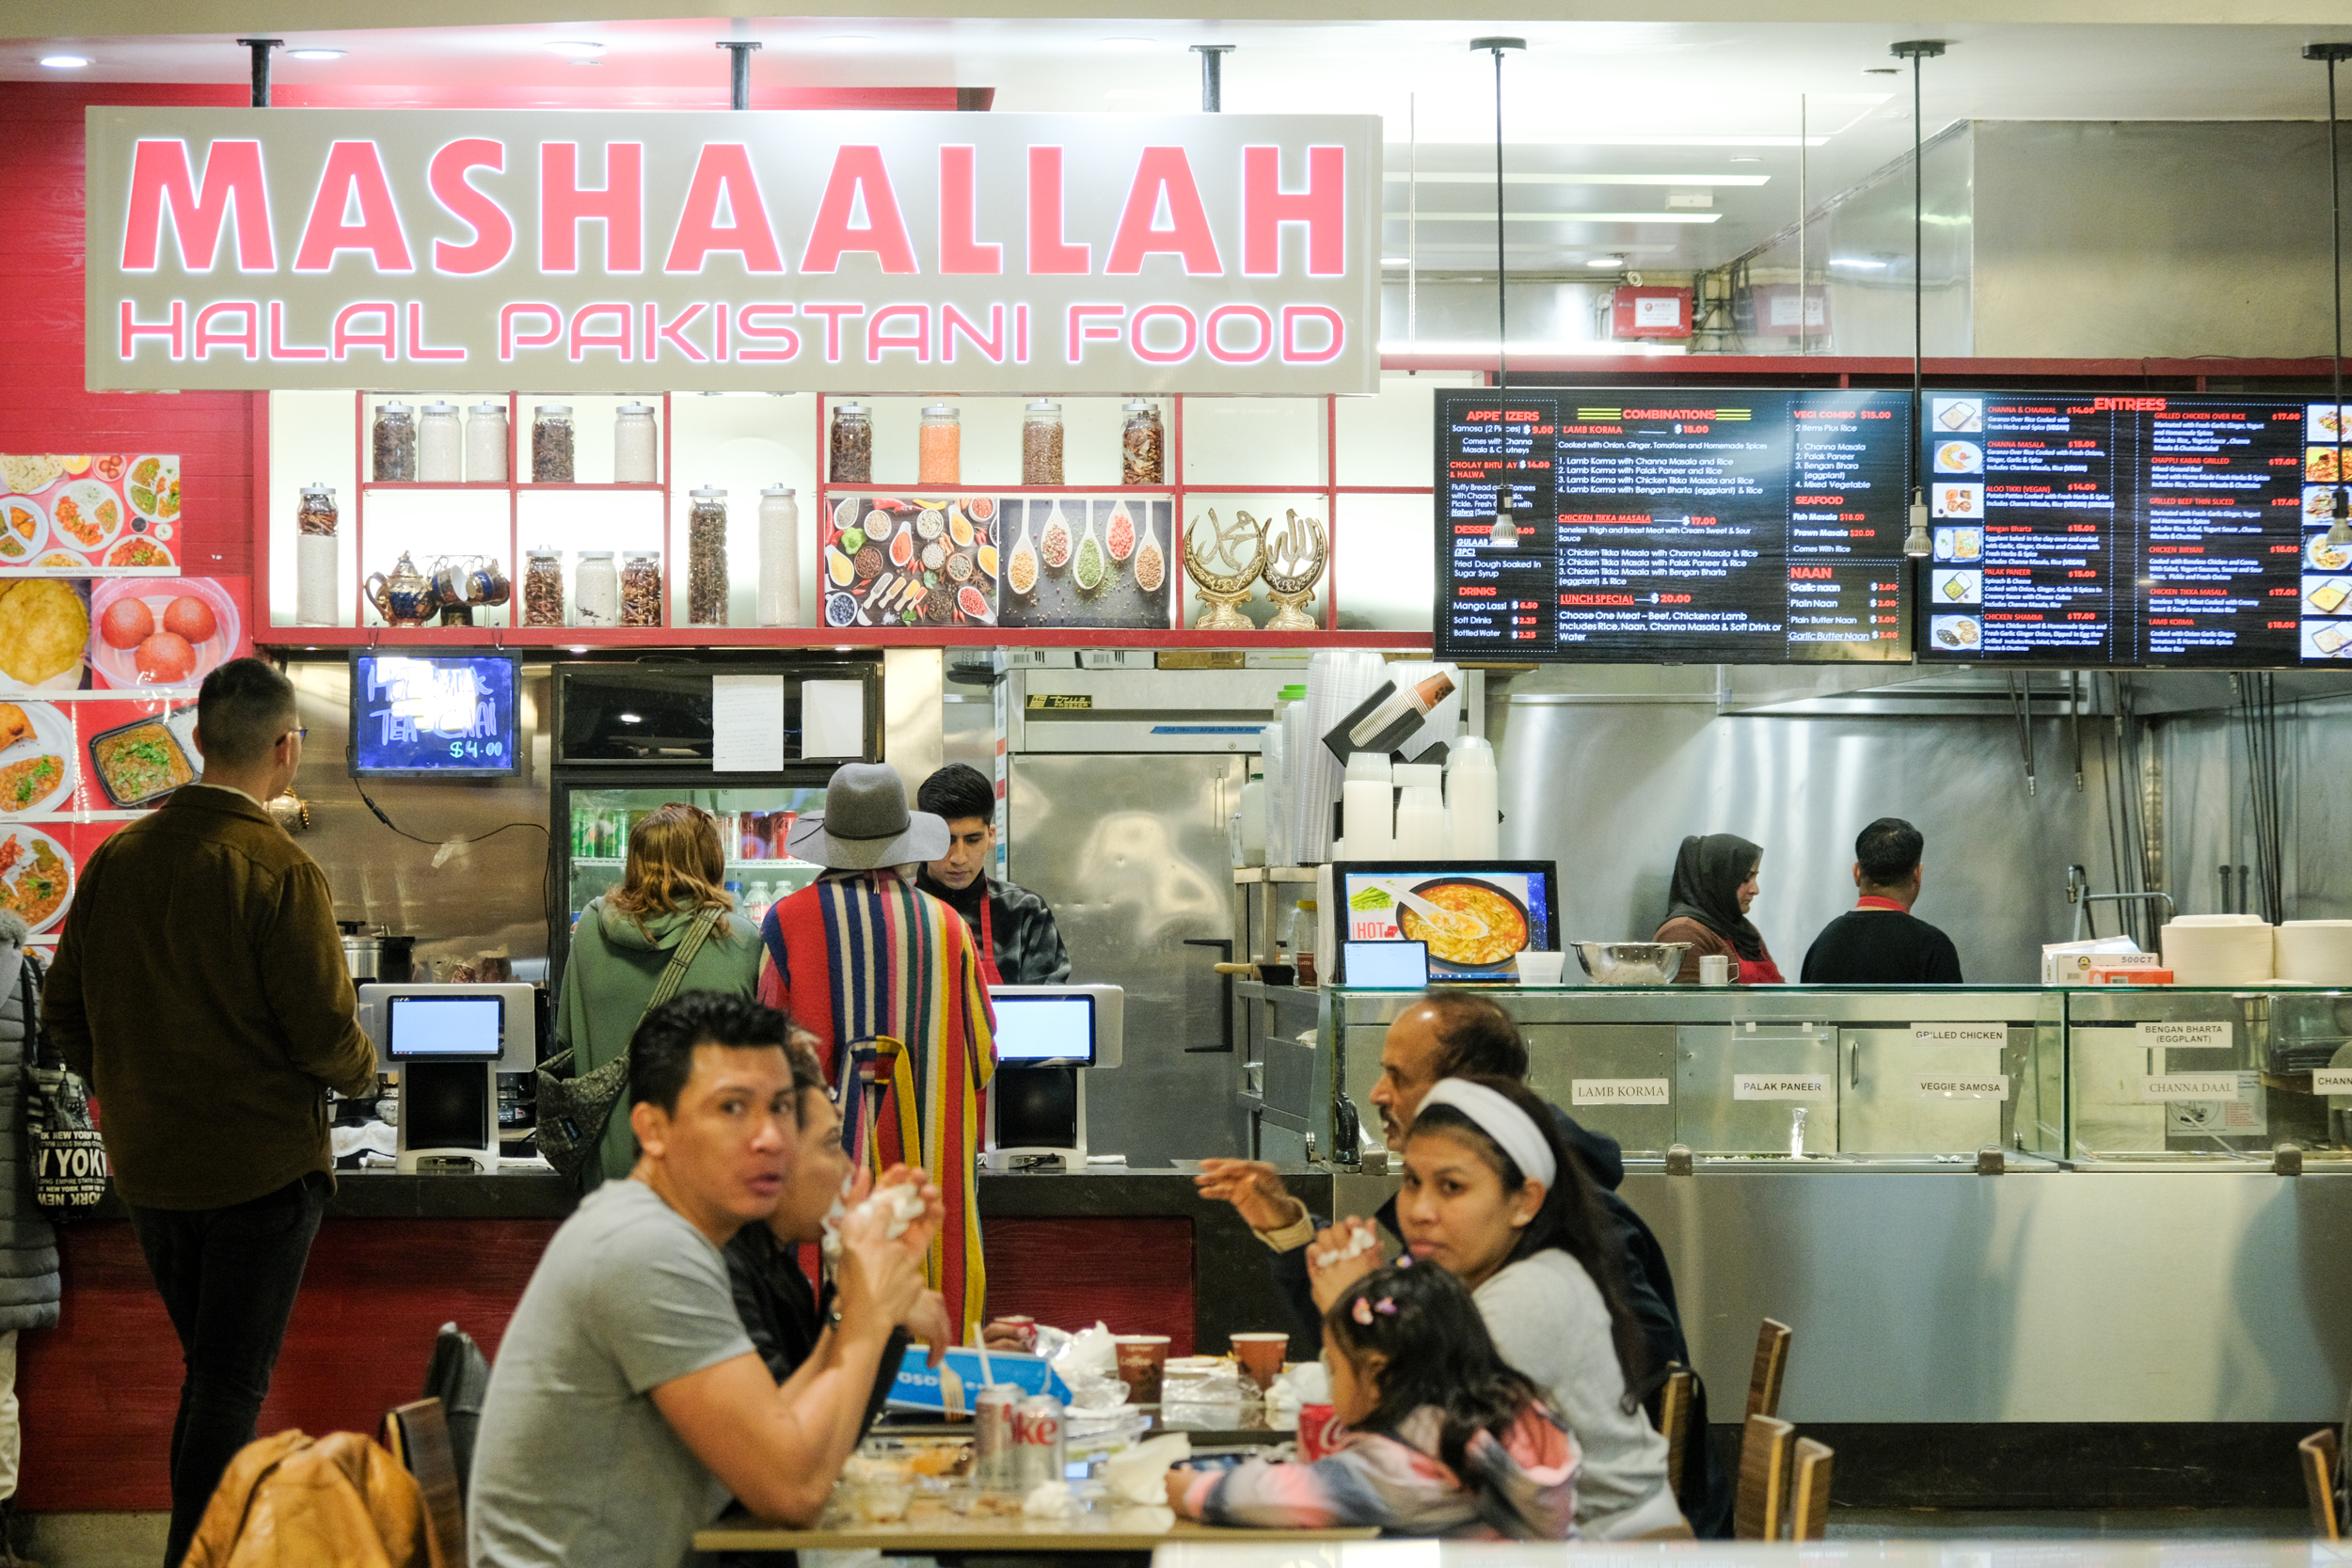 people dine in front of a halal pakistani restaurant stand